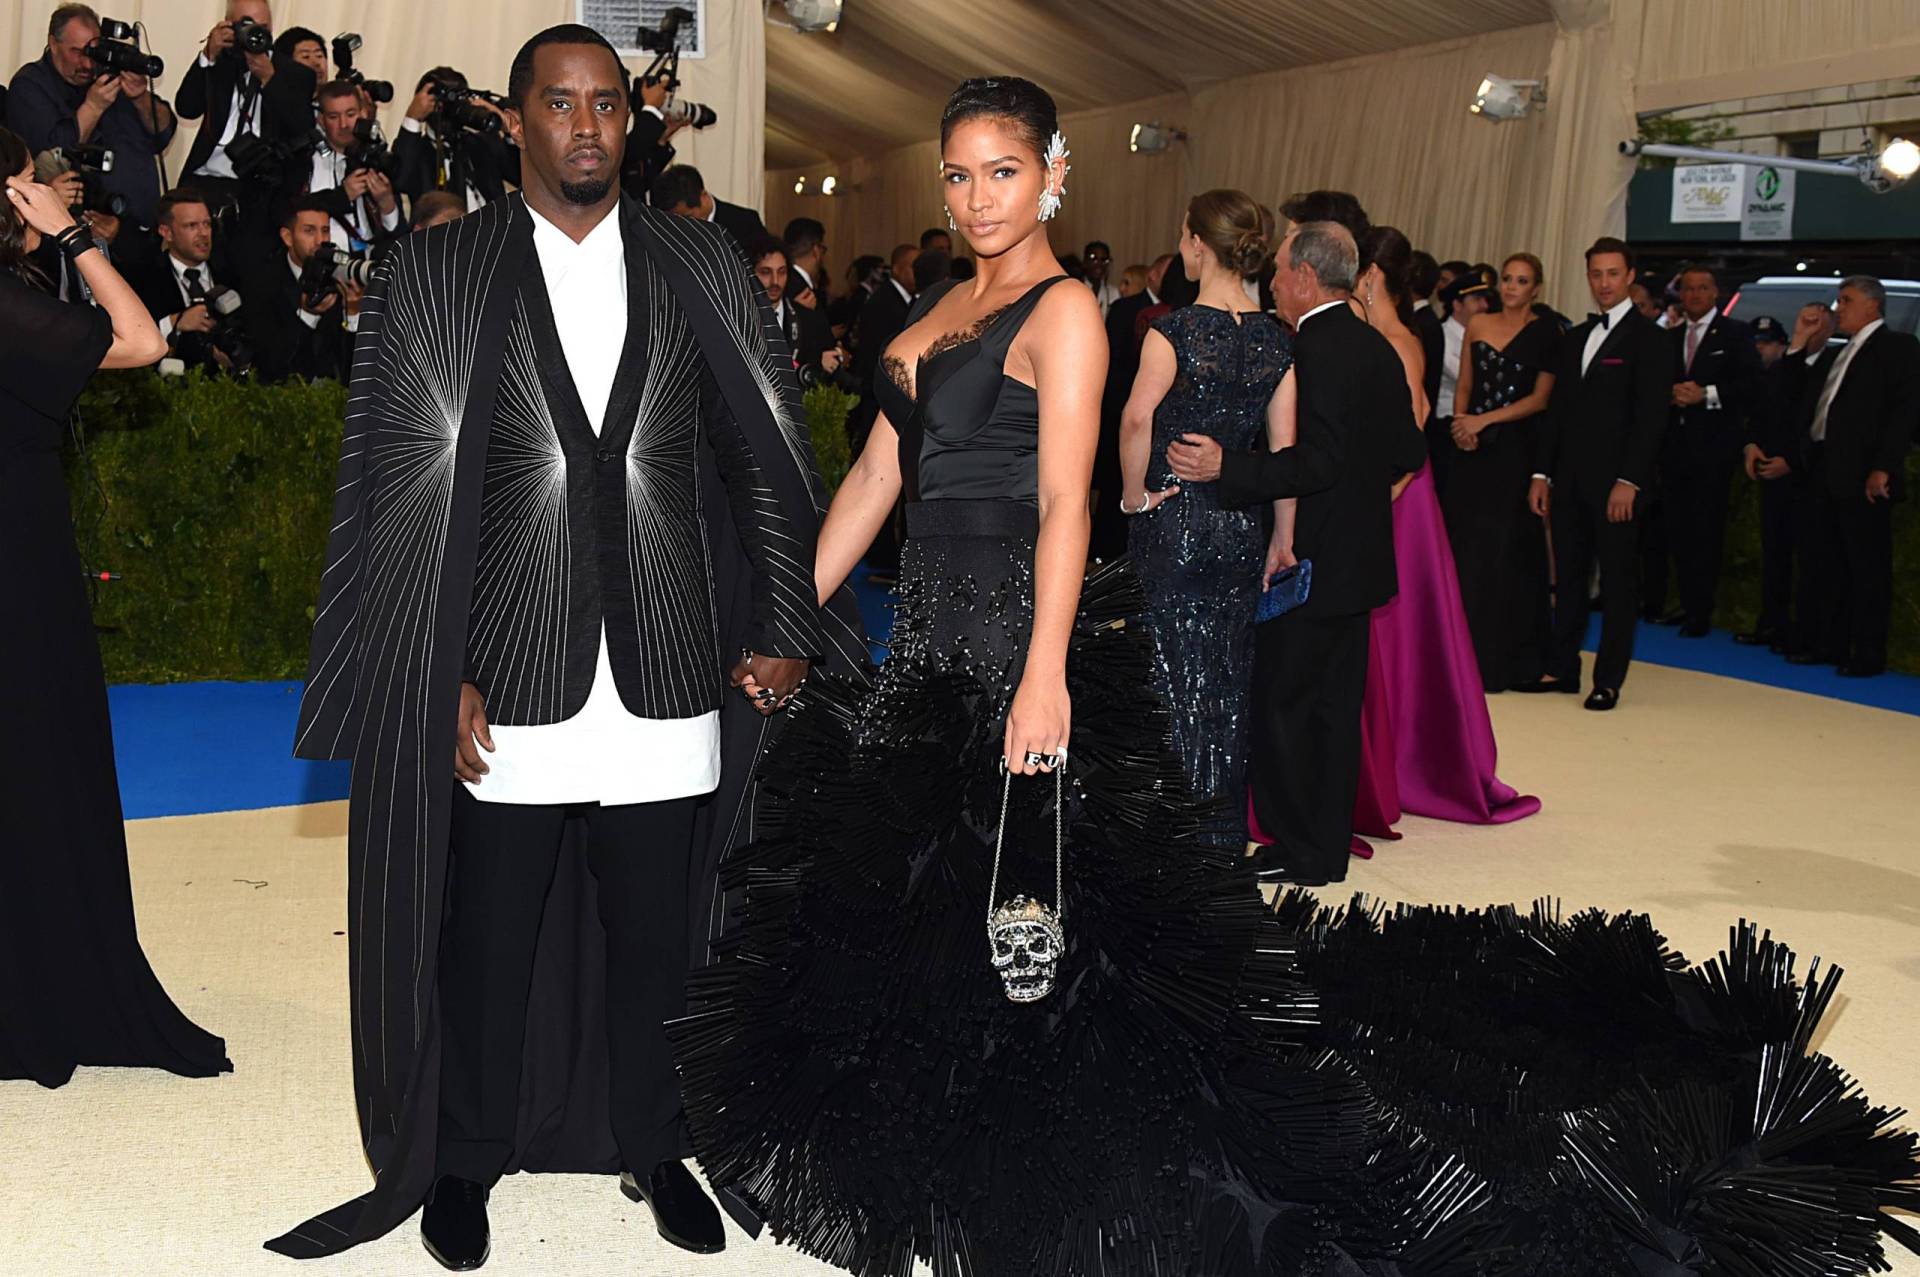 A Black man wearing a suit and very long couture coat stands holding hands with a Black woman wearing an elaborate black gown and purse in the shape of a skull.